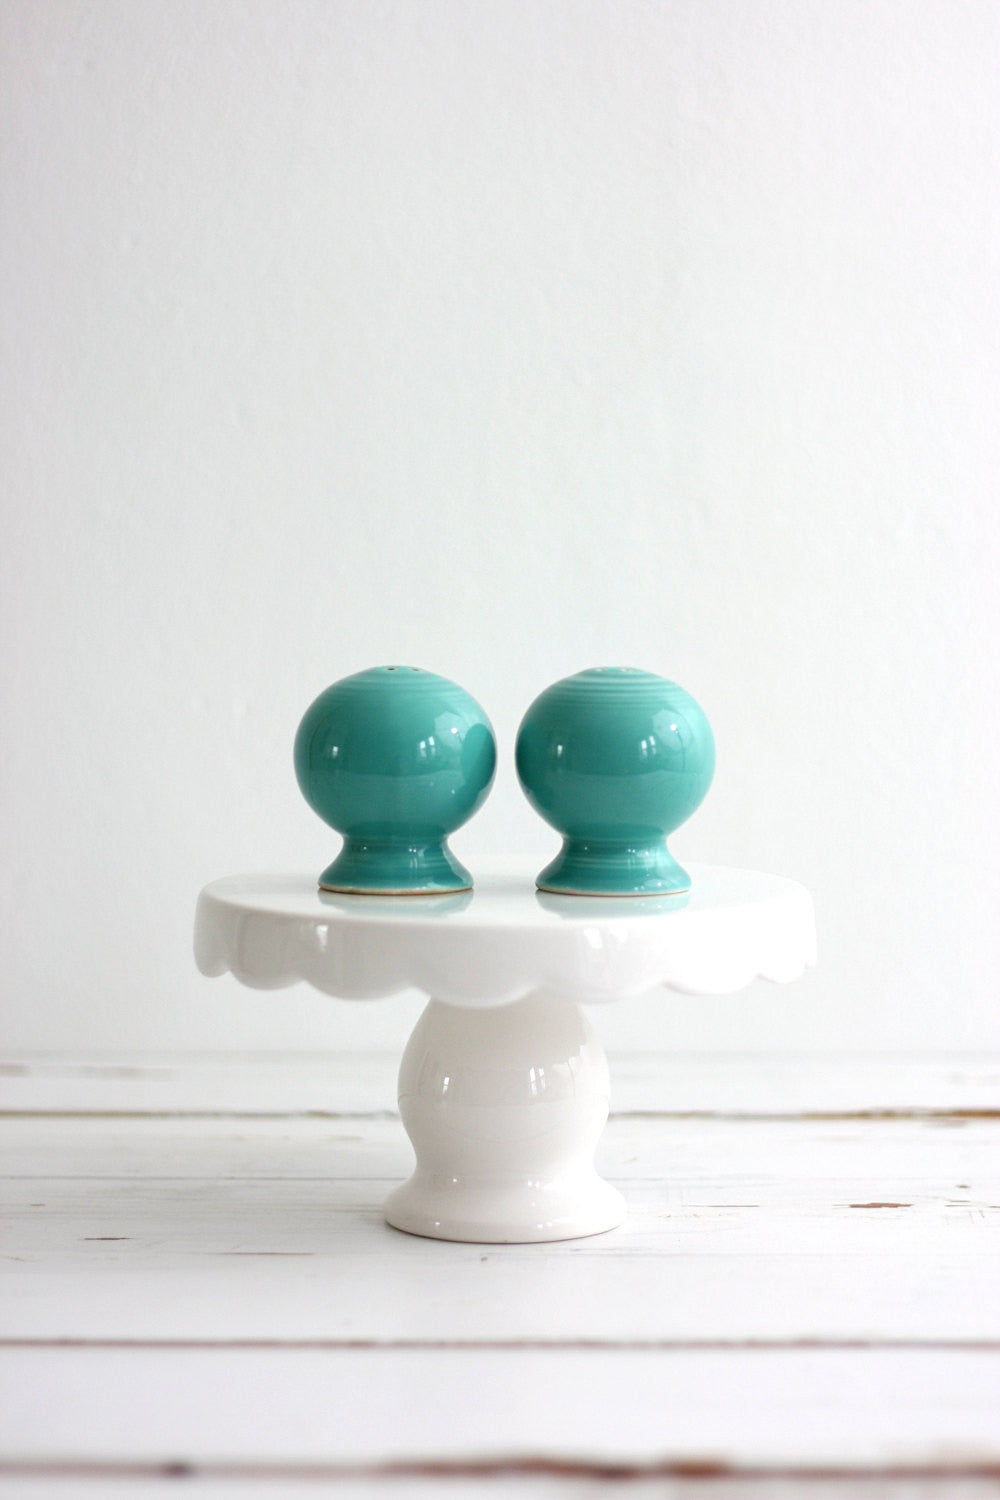 SOLD - Vintage Turquoise Fiestaware Salt and Pepper Shakers